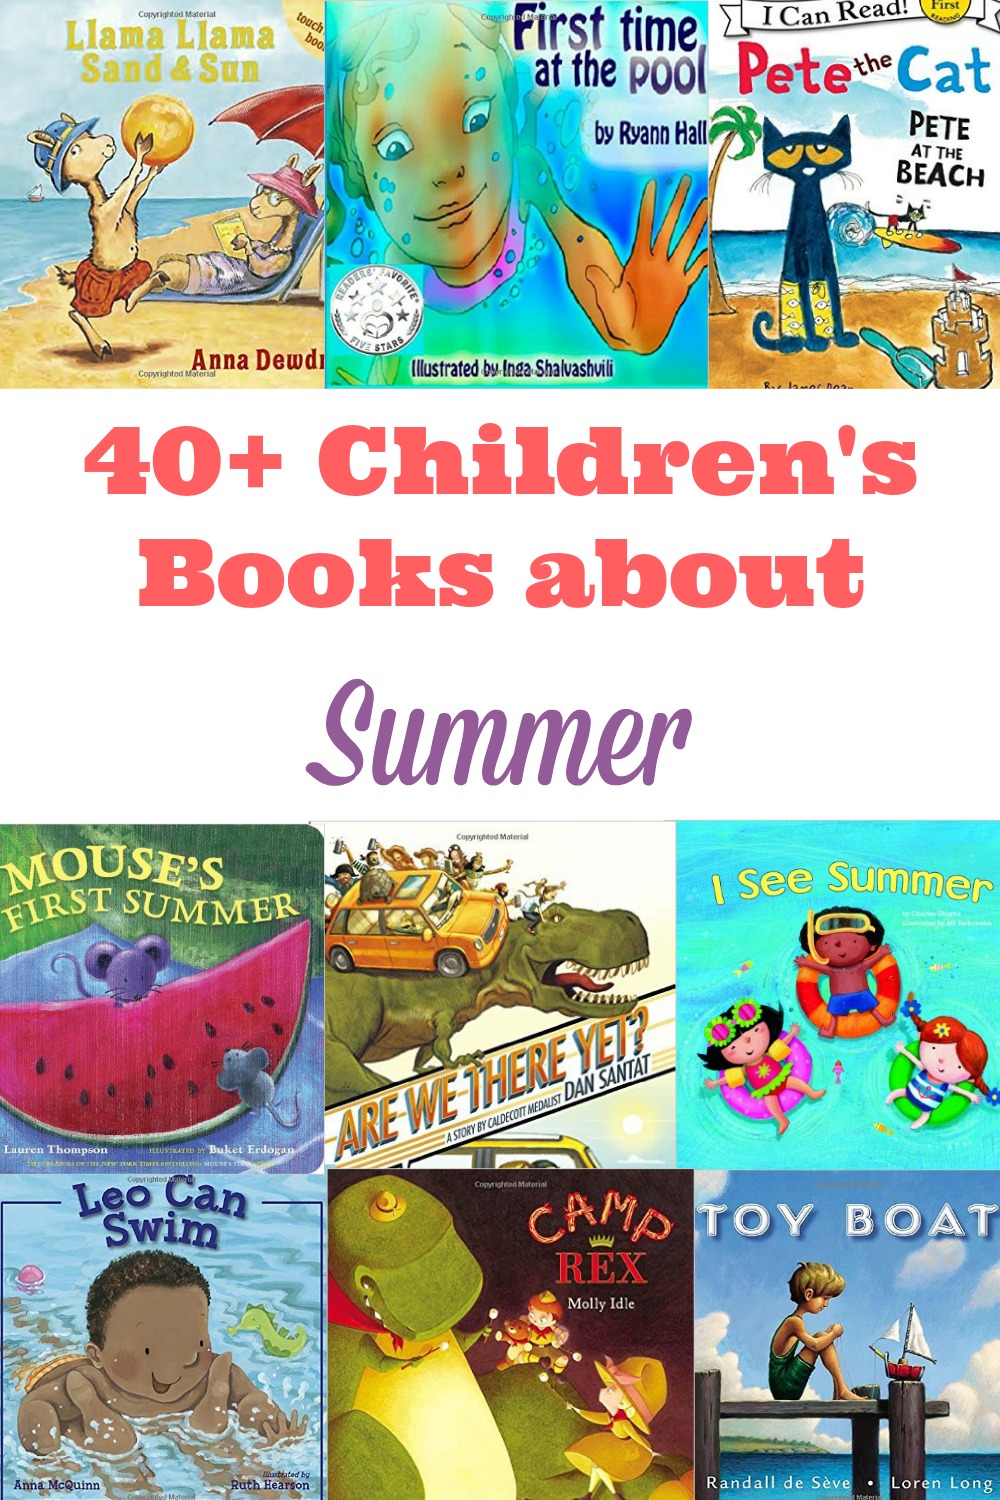 40 books about summer that kids should read including bestseller and classic titles you can enjoy as a family.